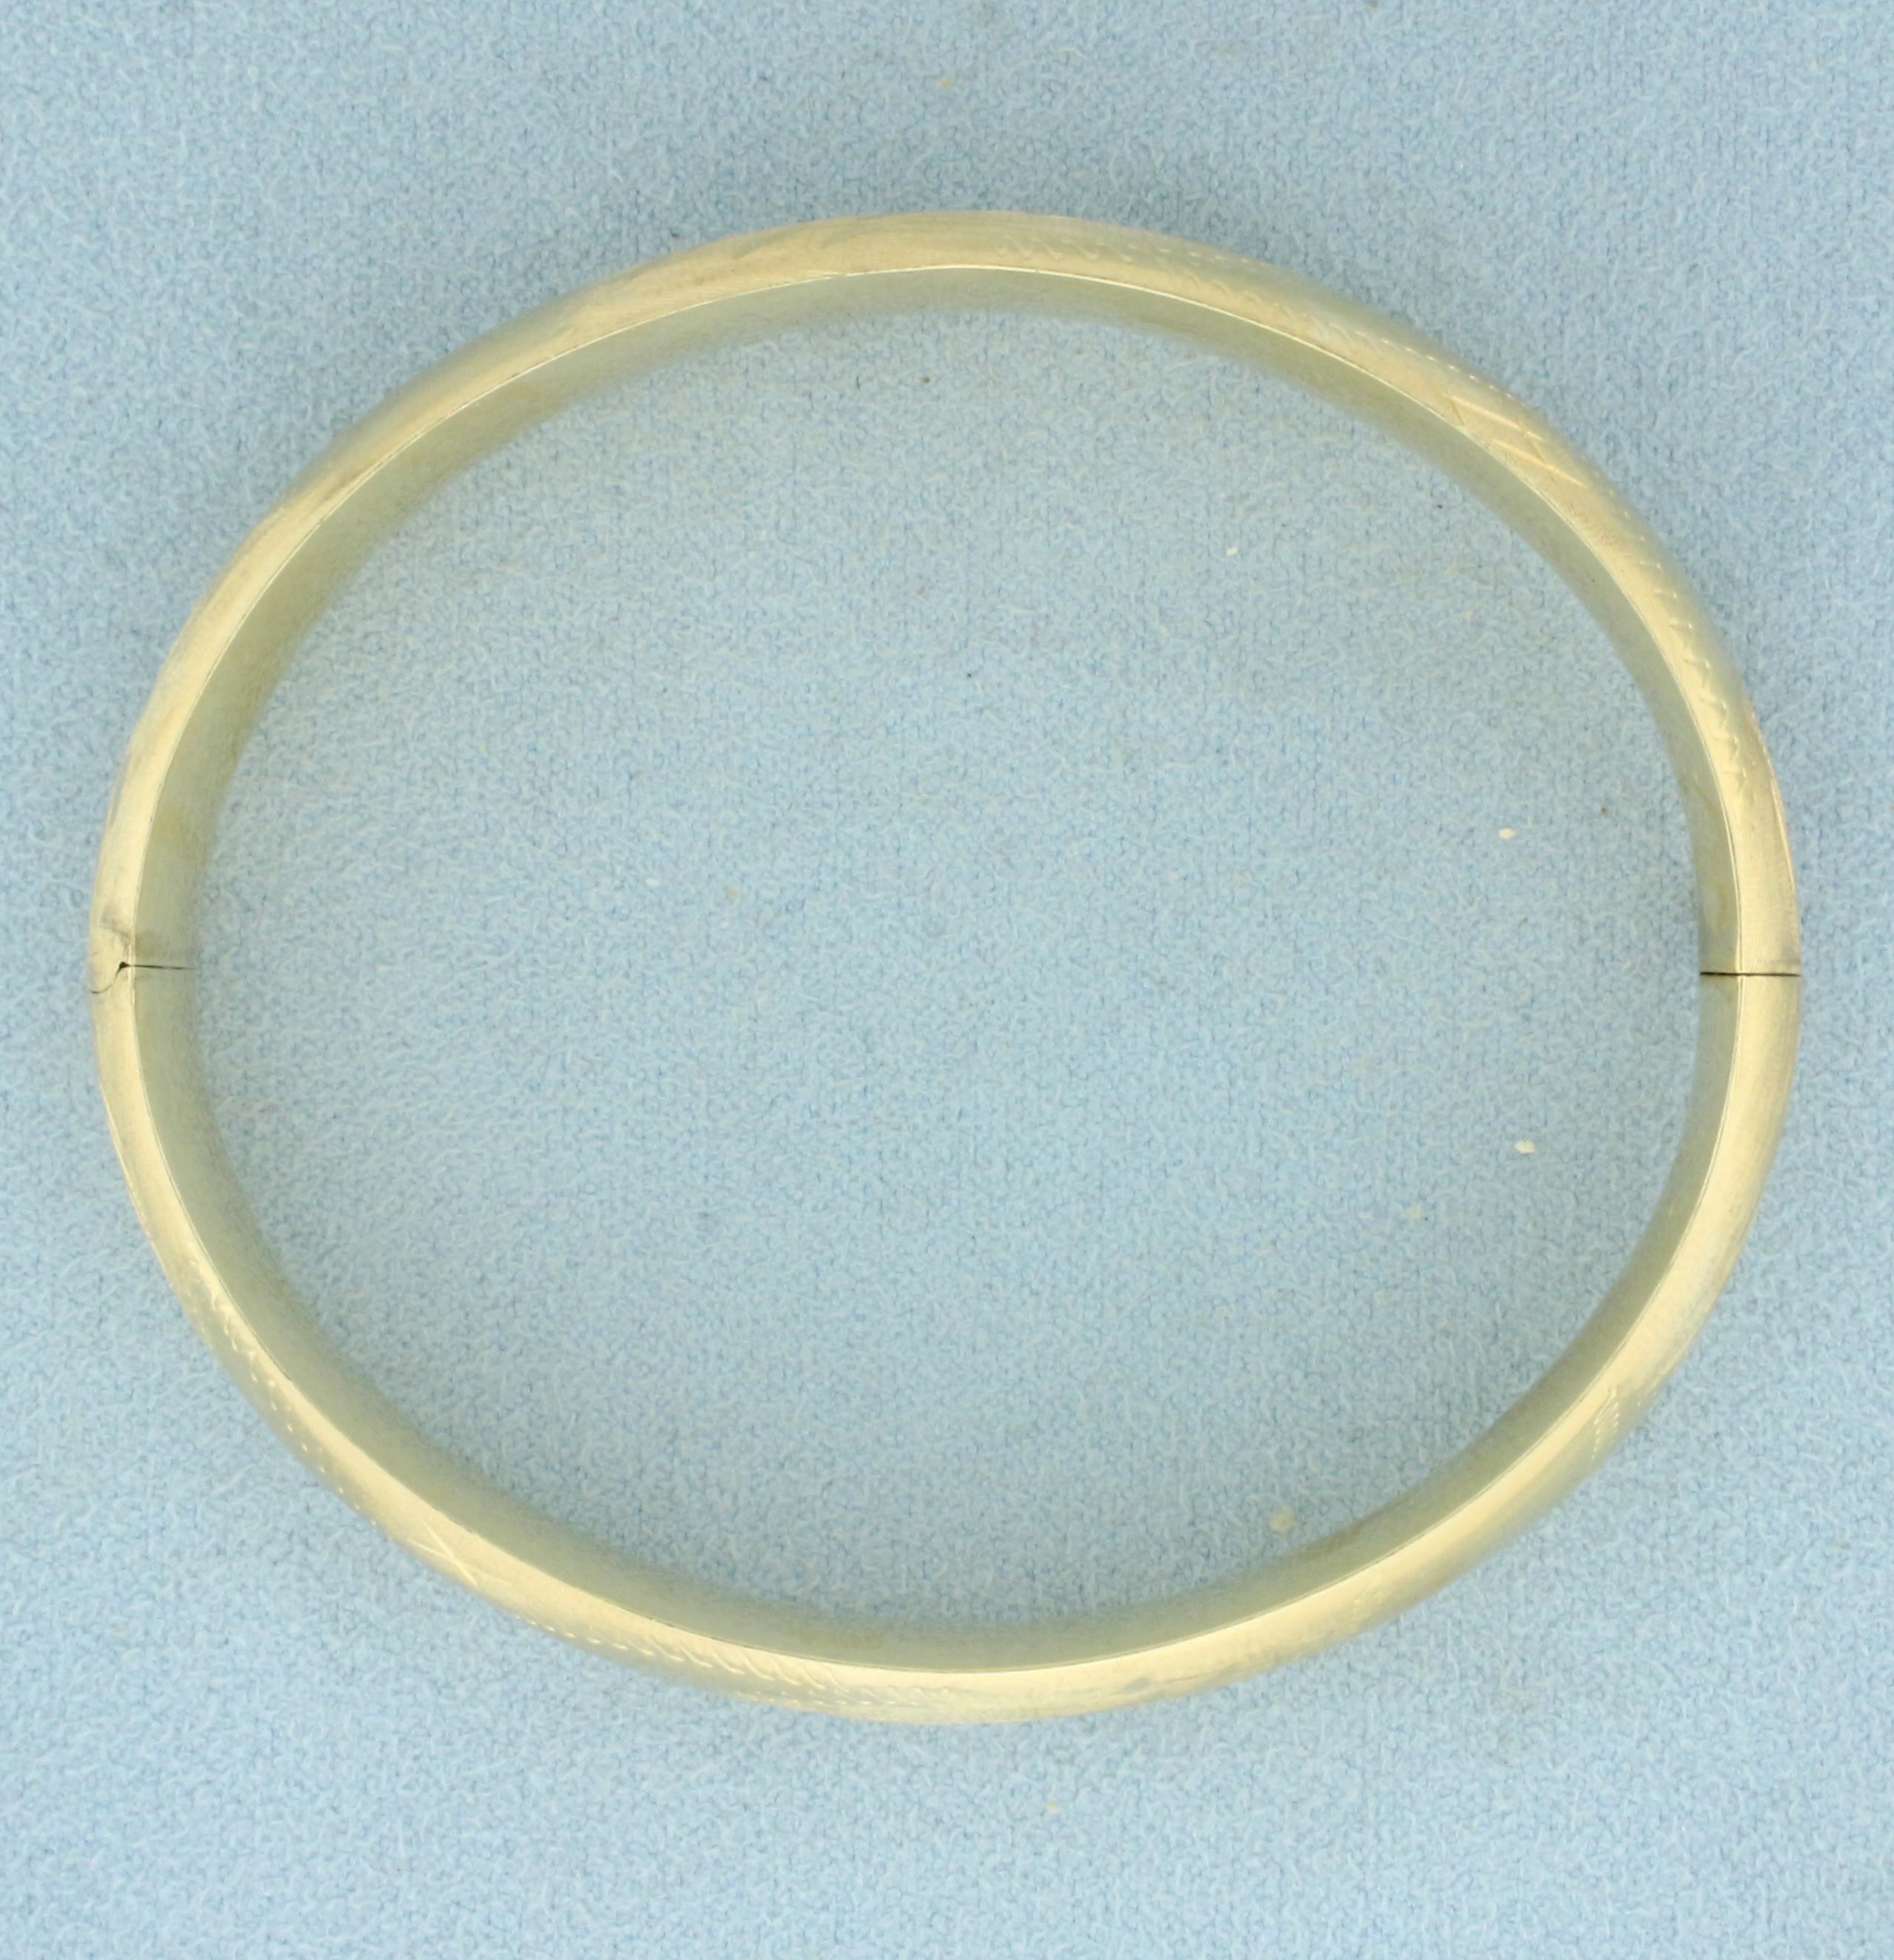 Etched Bangle Bracelet In 14k Yellow Gold